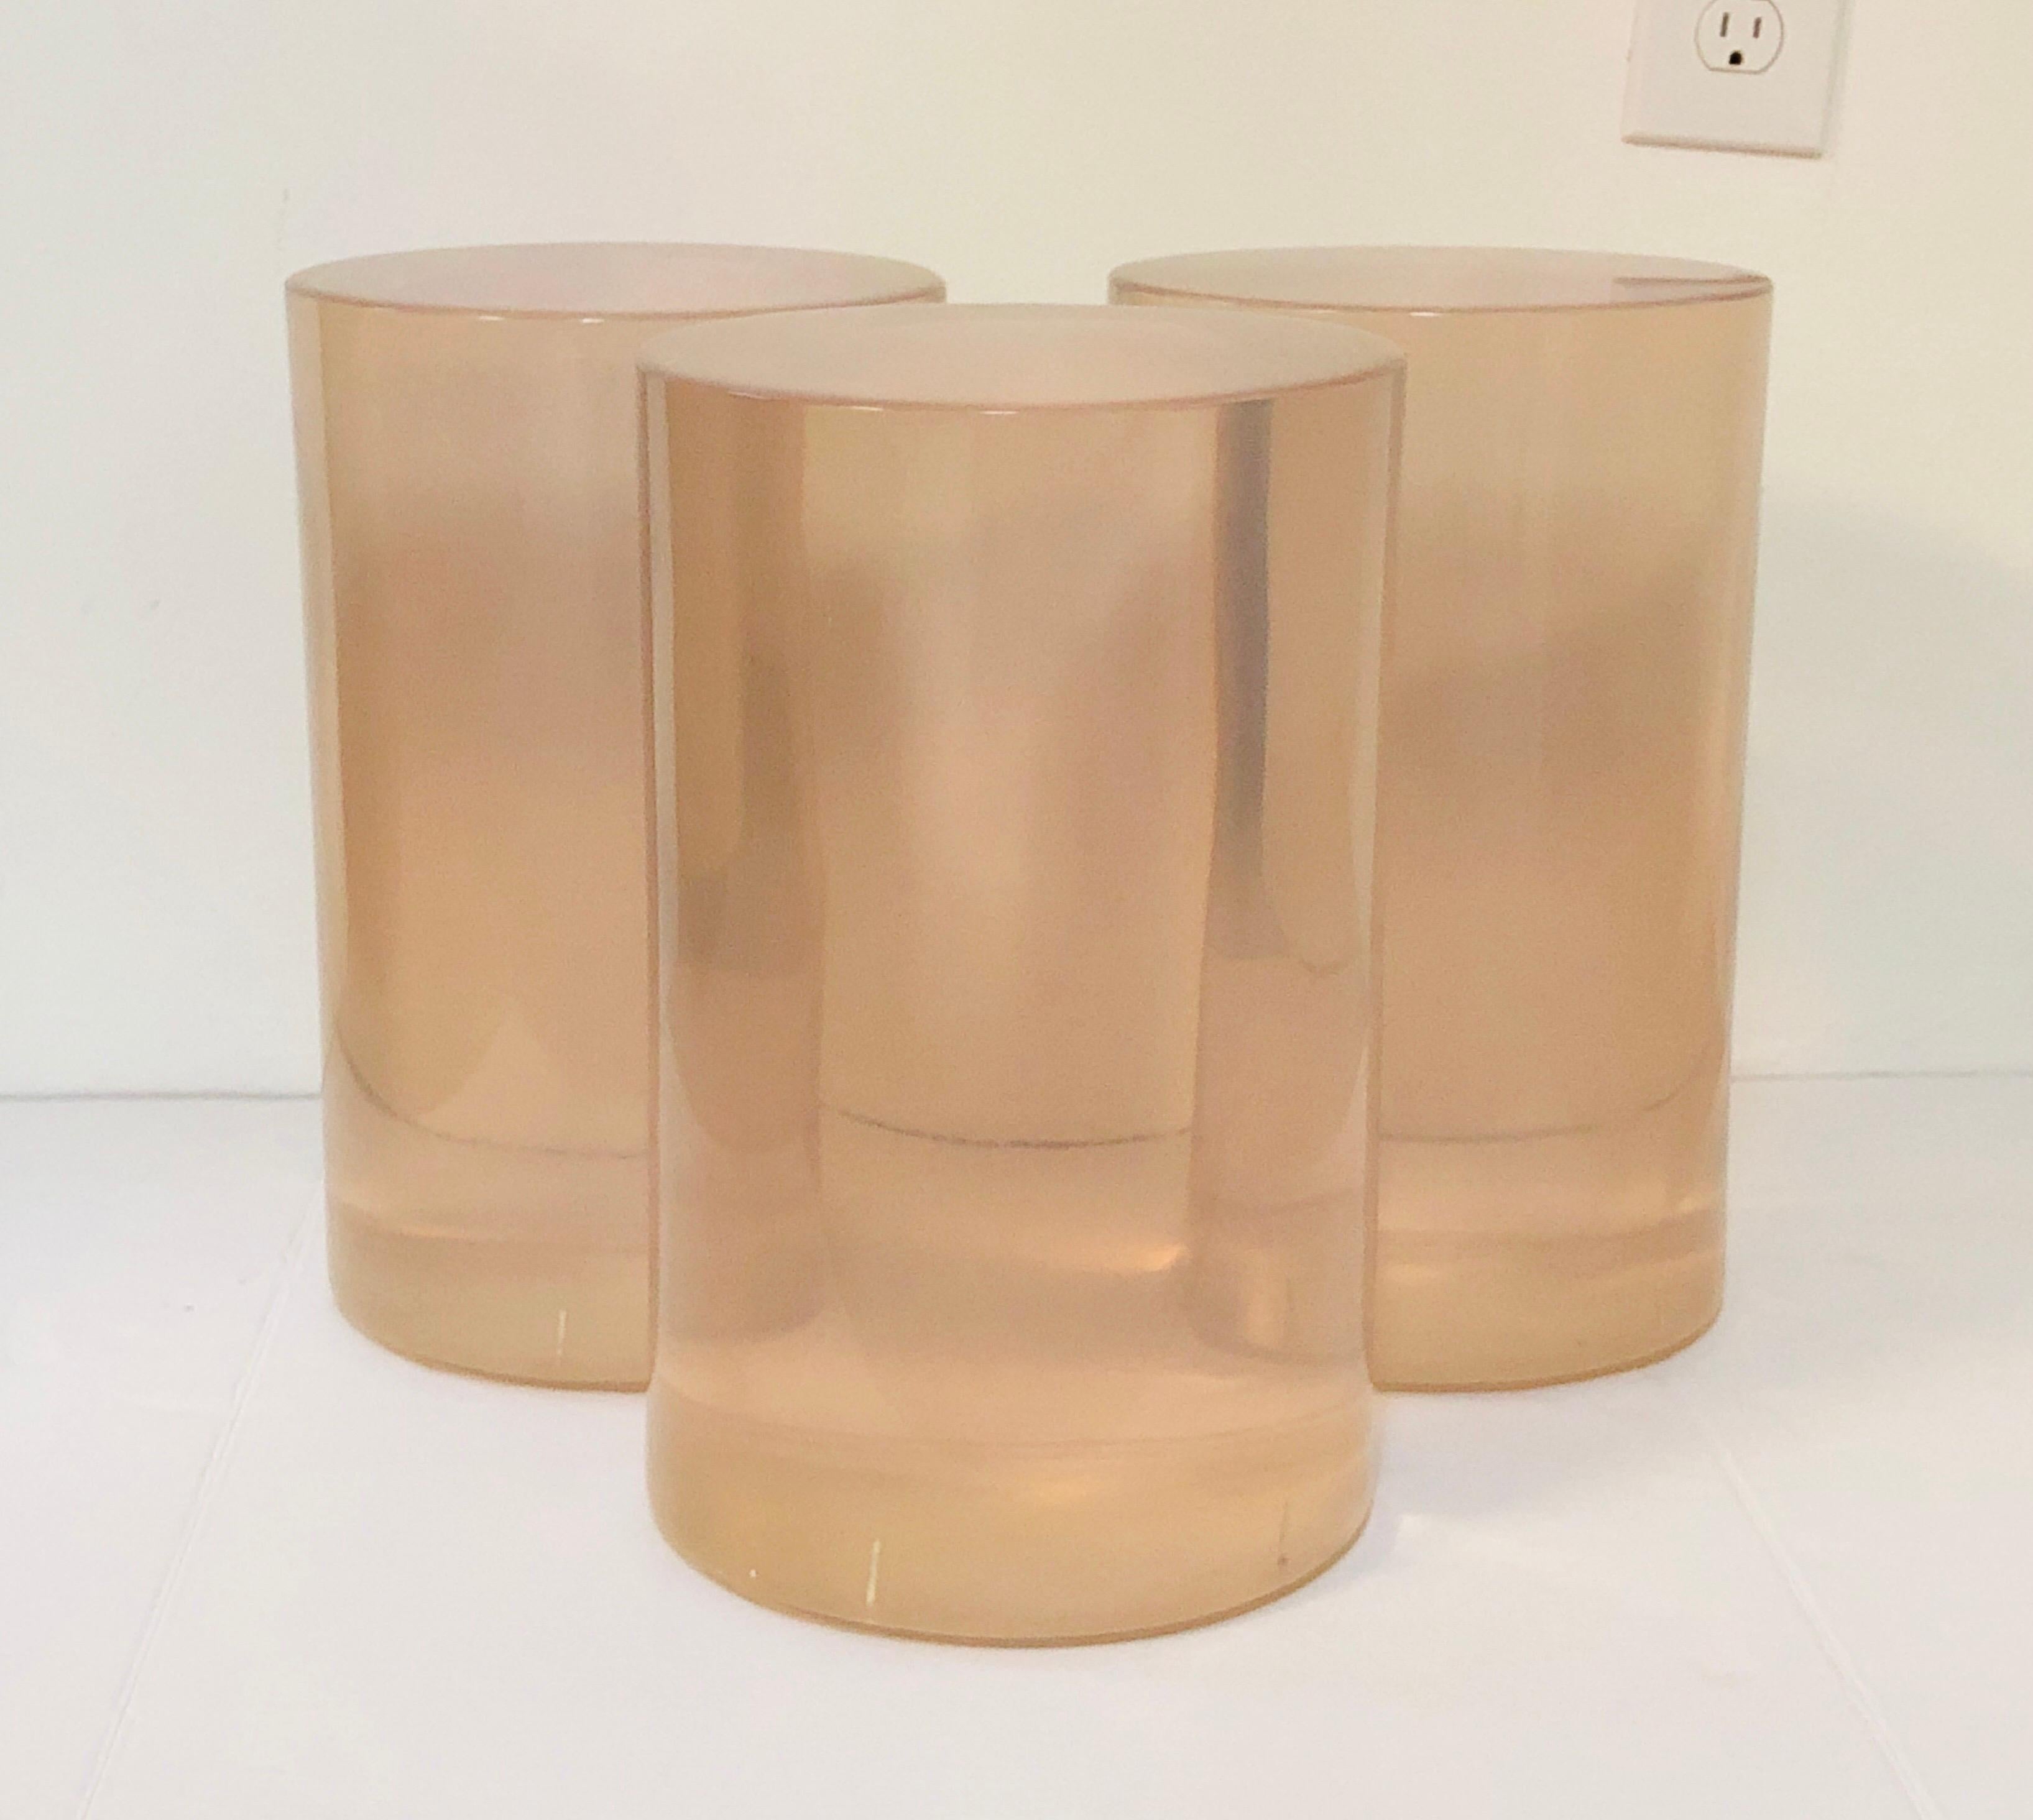 A solid acrylic resin drink or side table. Each one is 9